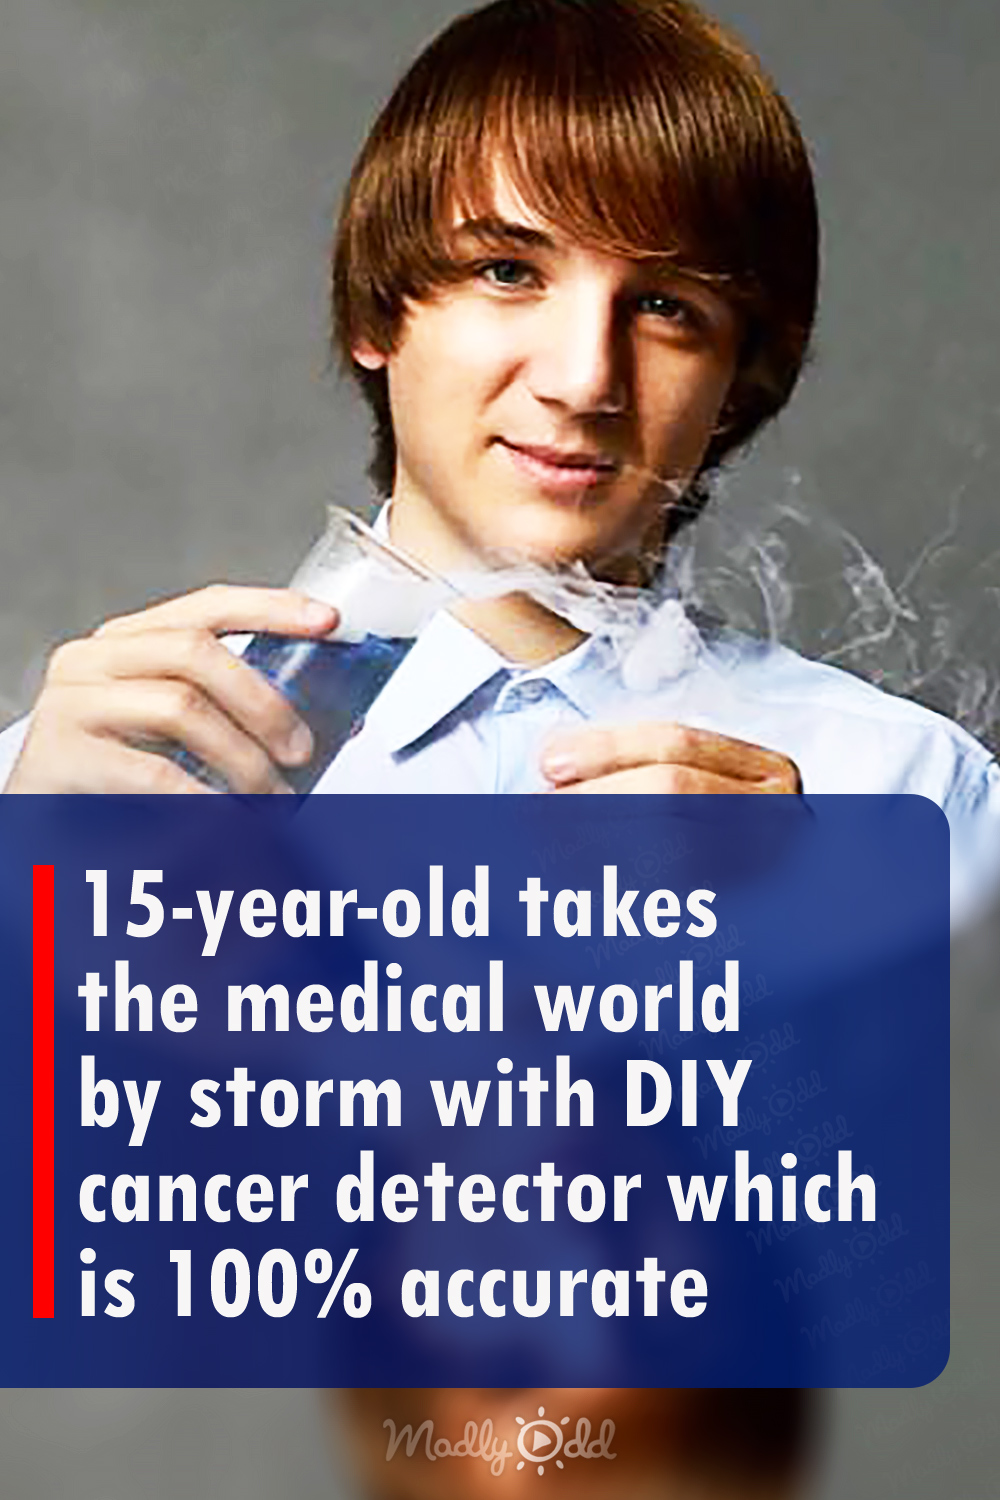 15-year-old takes the medical world by storm with DIY cancer detector which is 100% accurate